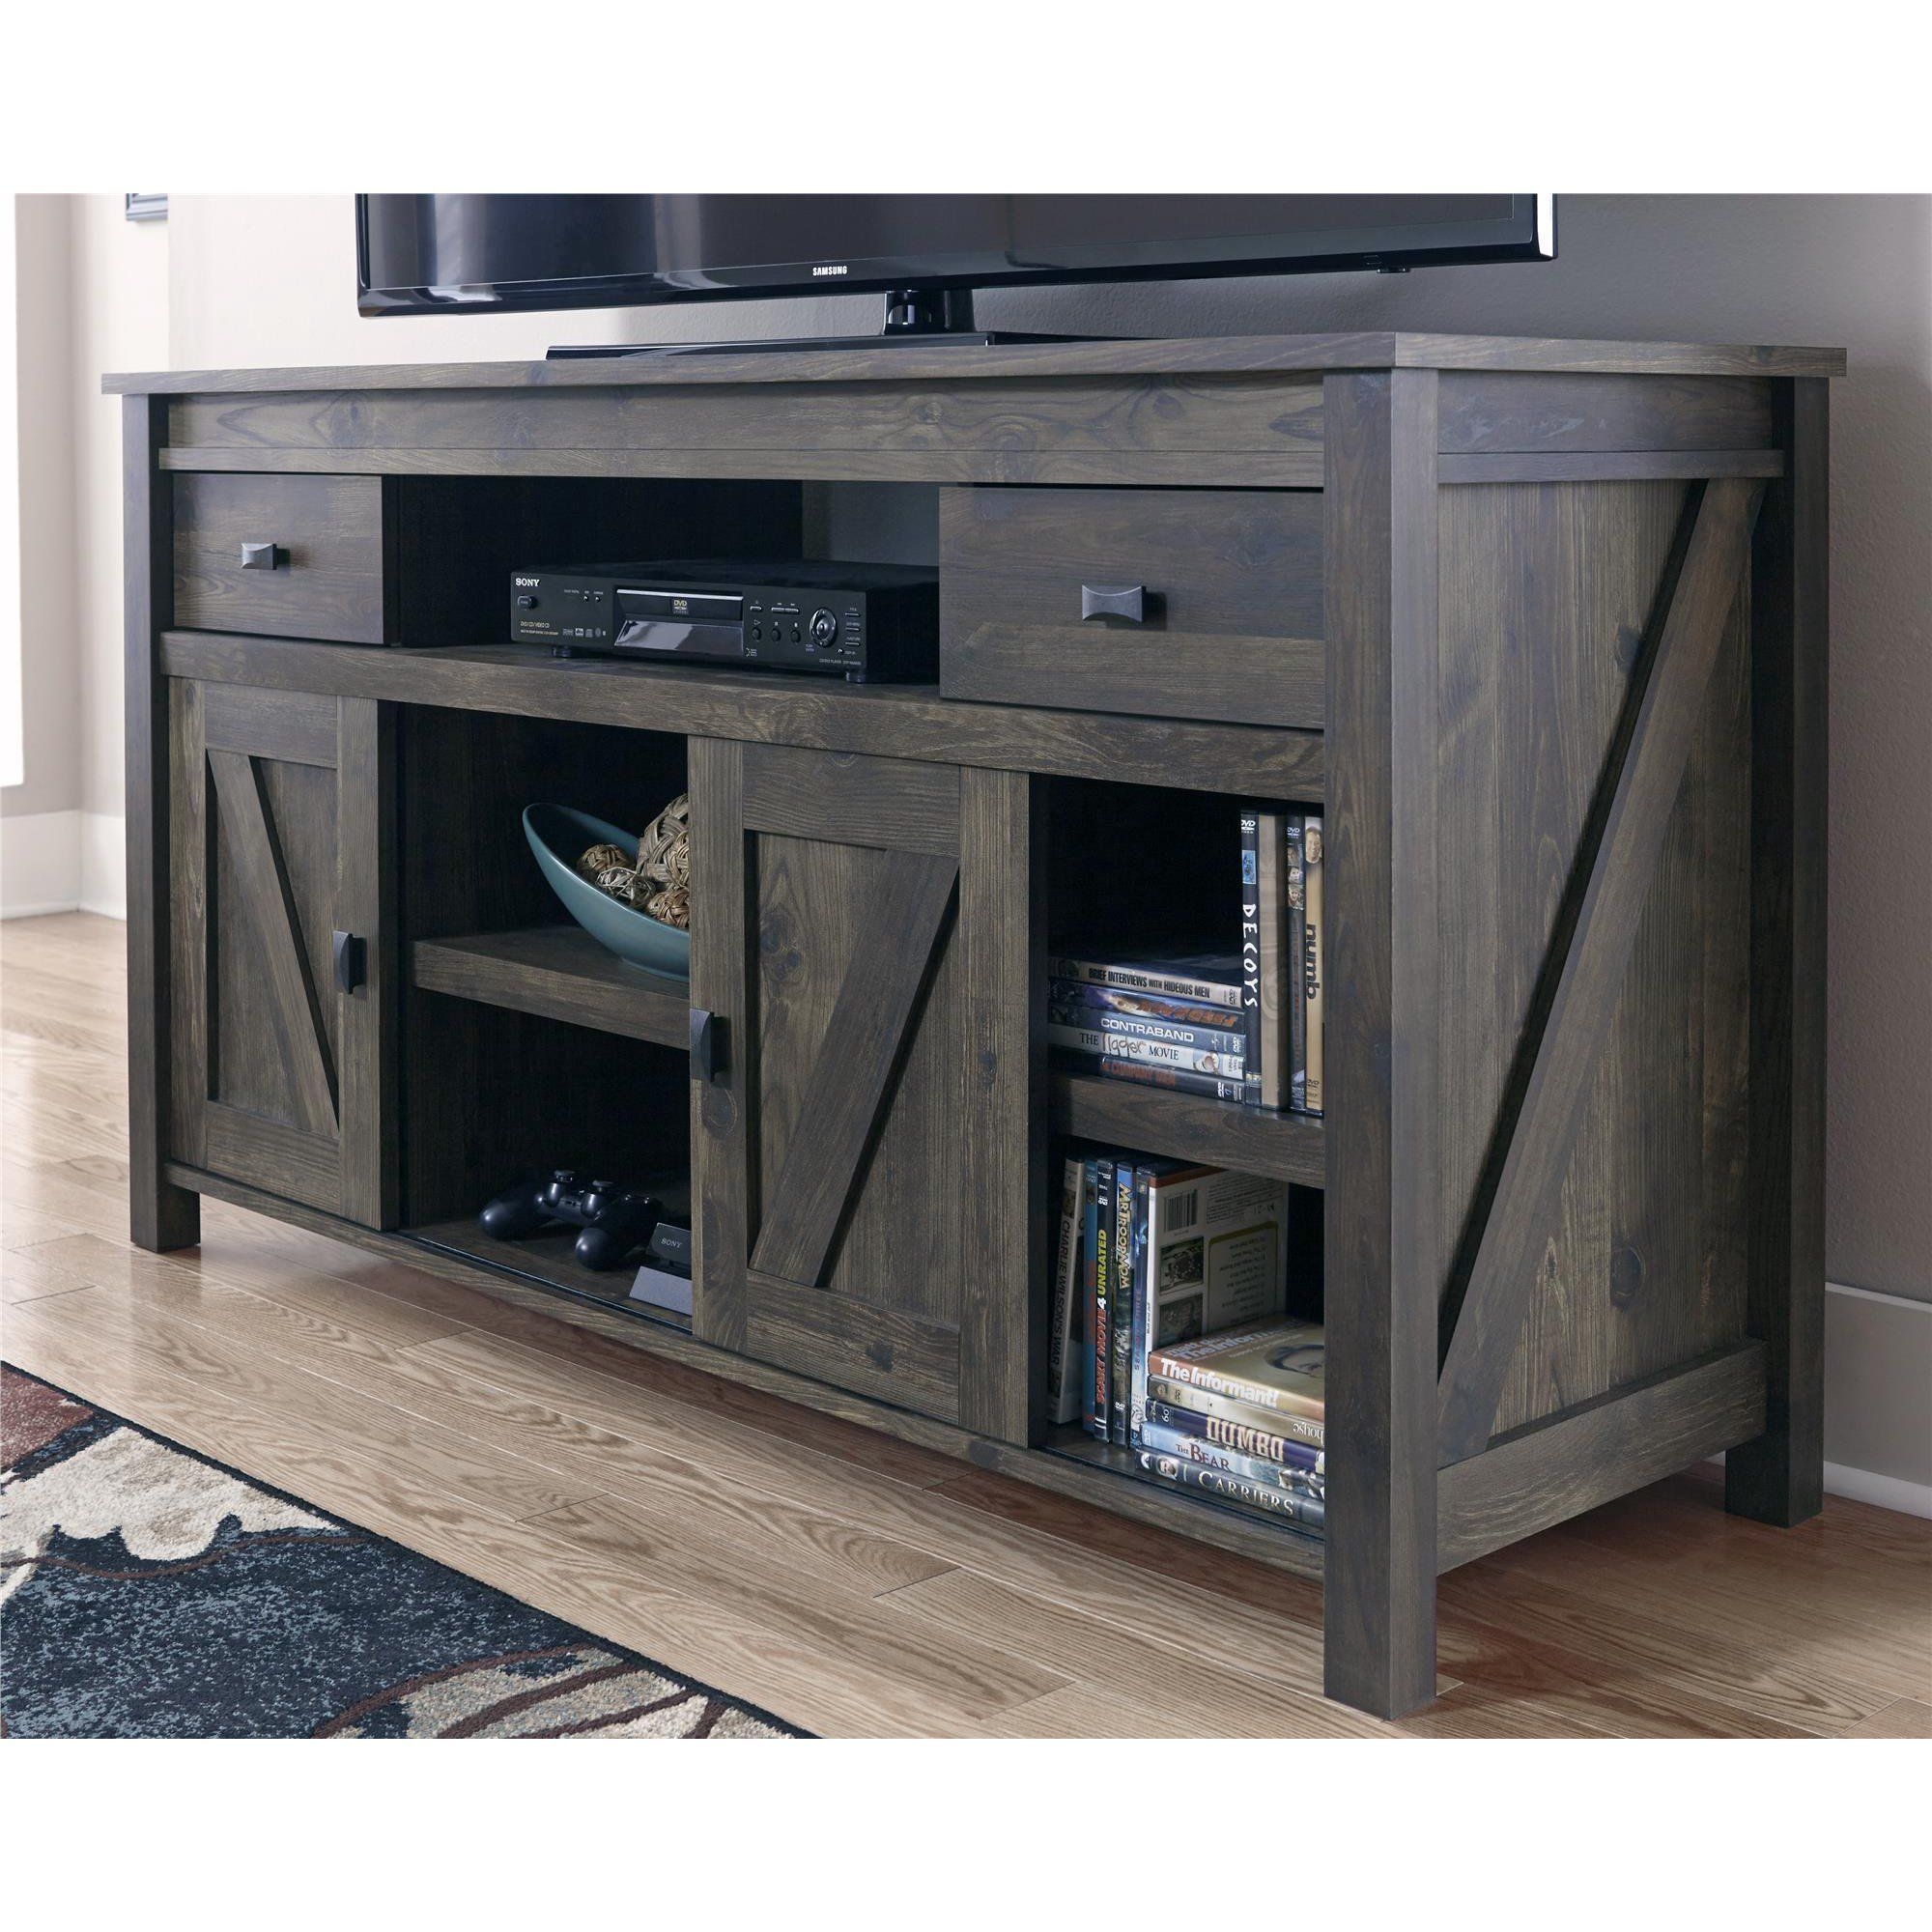 Woven Paths Scandi Farmhouse Tv Stand For Tvs Up To 60 Pertaining To Woven Paths Barn Door Tv Stands In Multiple Finishes (View 15 of 15)